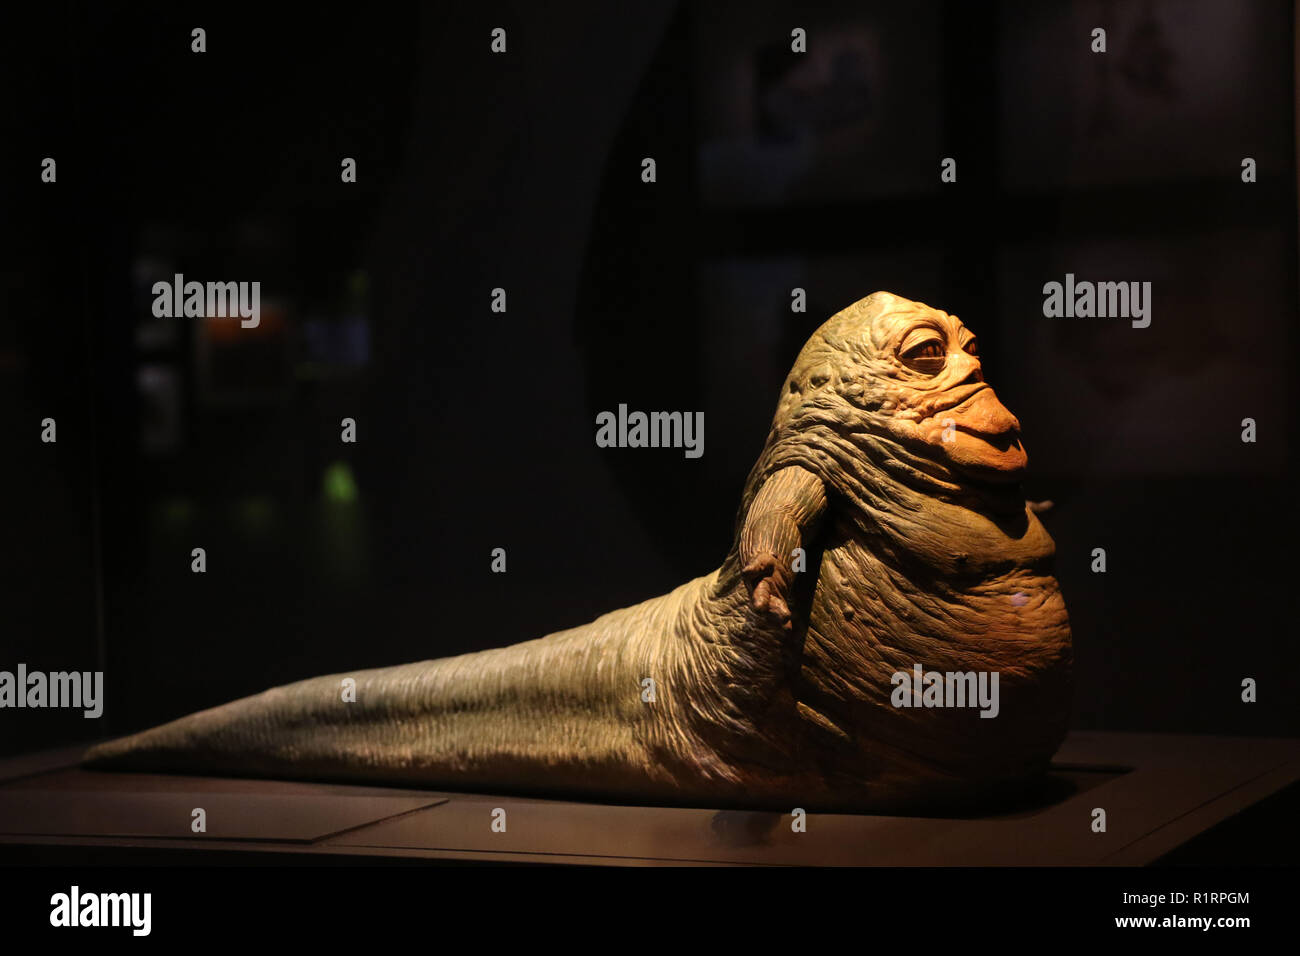 Sydney, Australia. 15 November 2018. Media preview of STAR WARS Identities: The Exhibition at the Powerhouse Museum. Pictured: Jabba the Hutt, model from Star Wars: Episode I The Phantom Menace (1999). This model helped to visualise a younger and slimmer version of Jabba the Hutt who would be needed to preside over the Boonta Eve Podrace. Credit: Richard Milnes/Alamy Live News Stock Photo